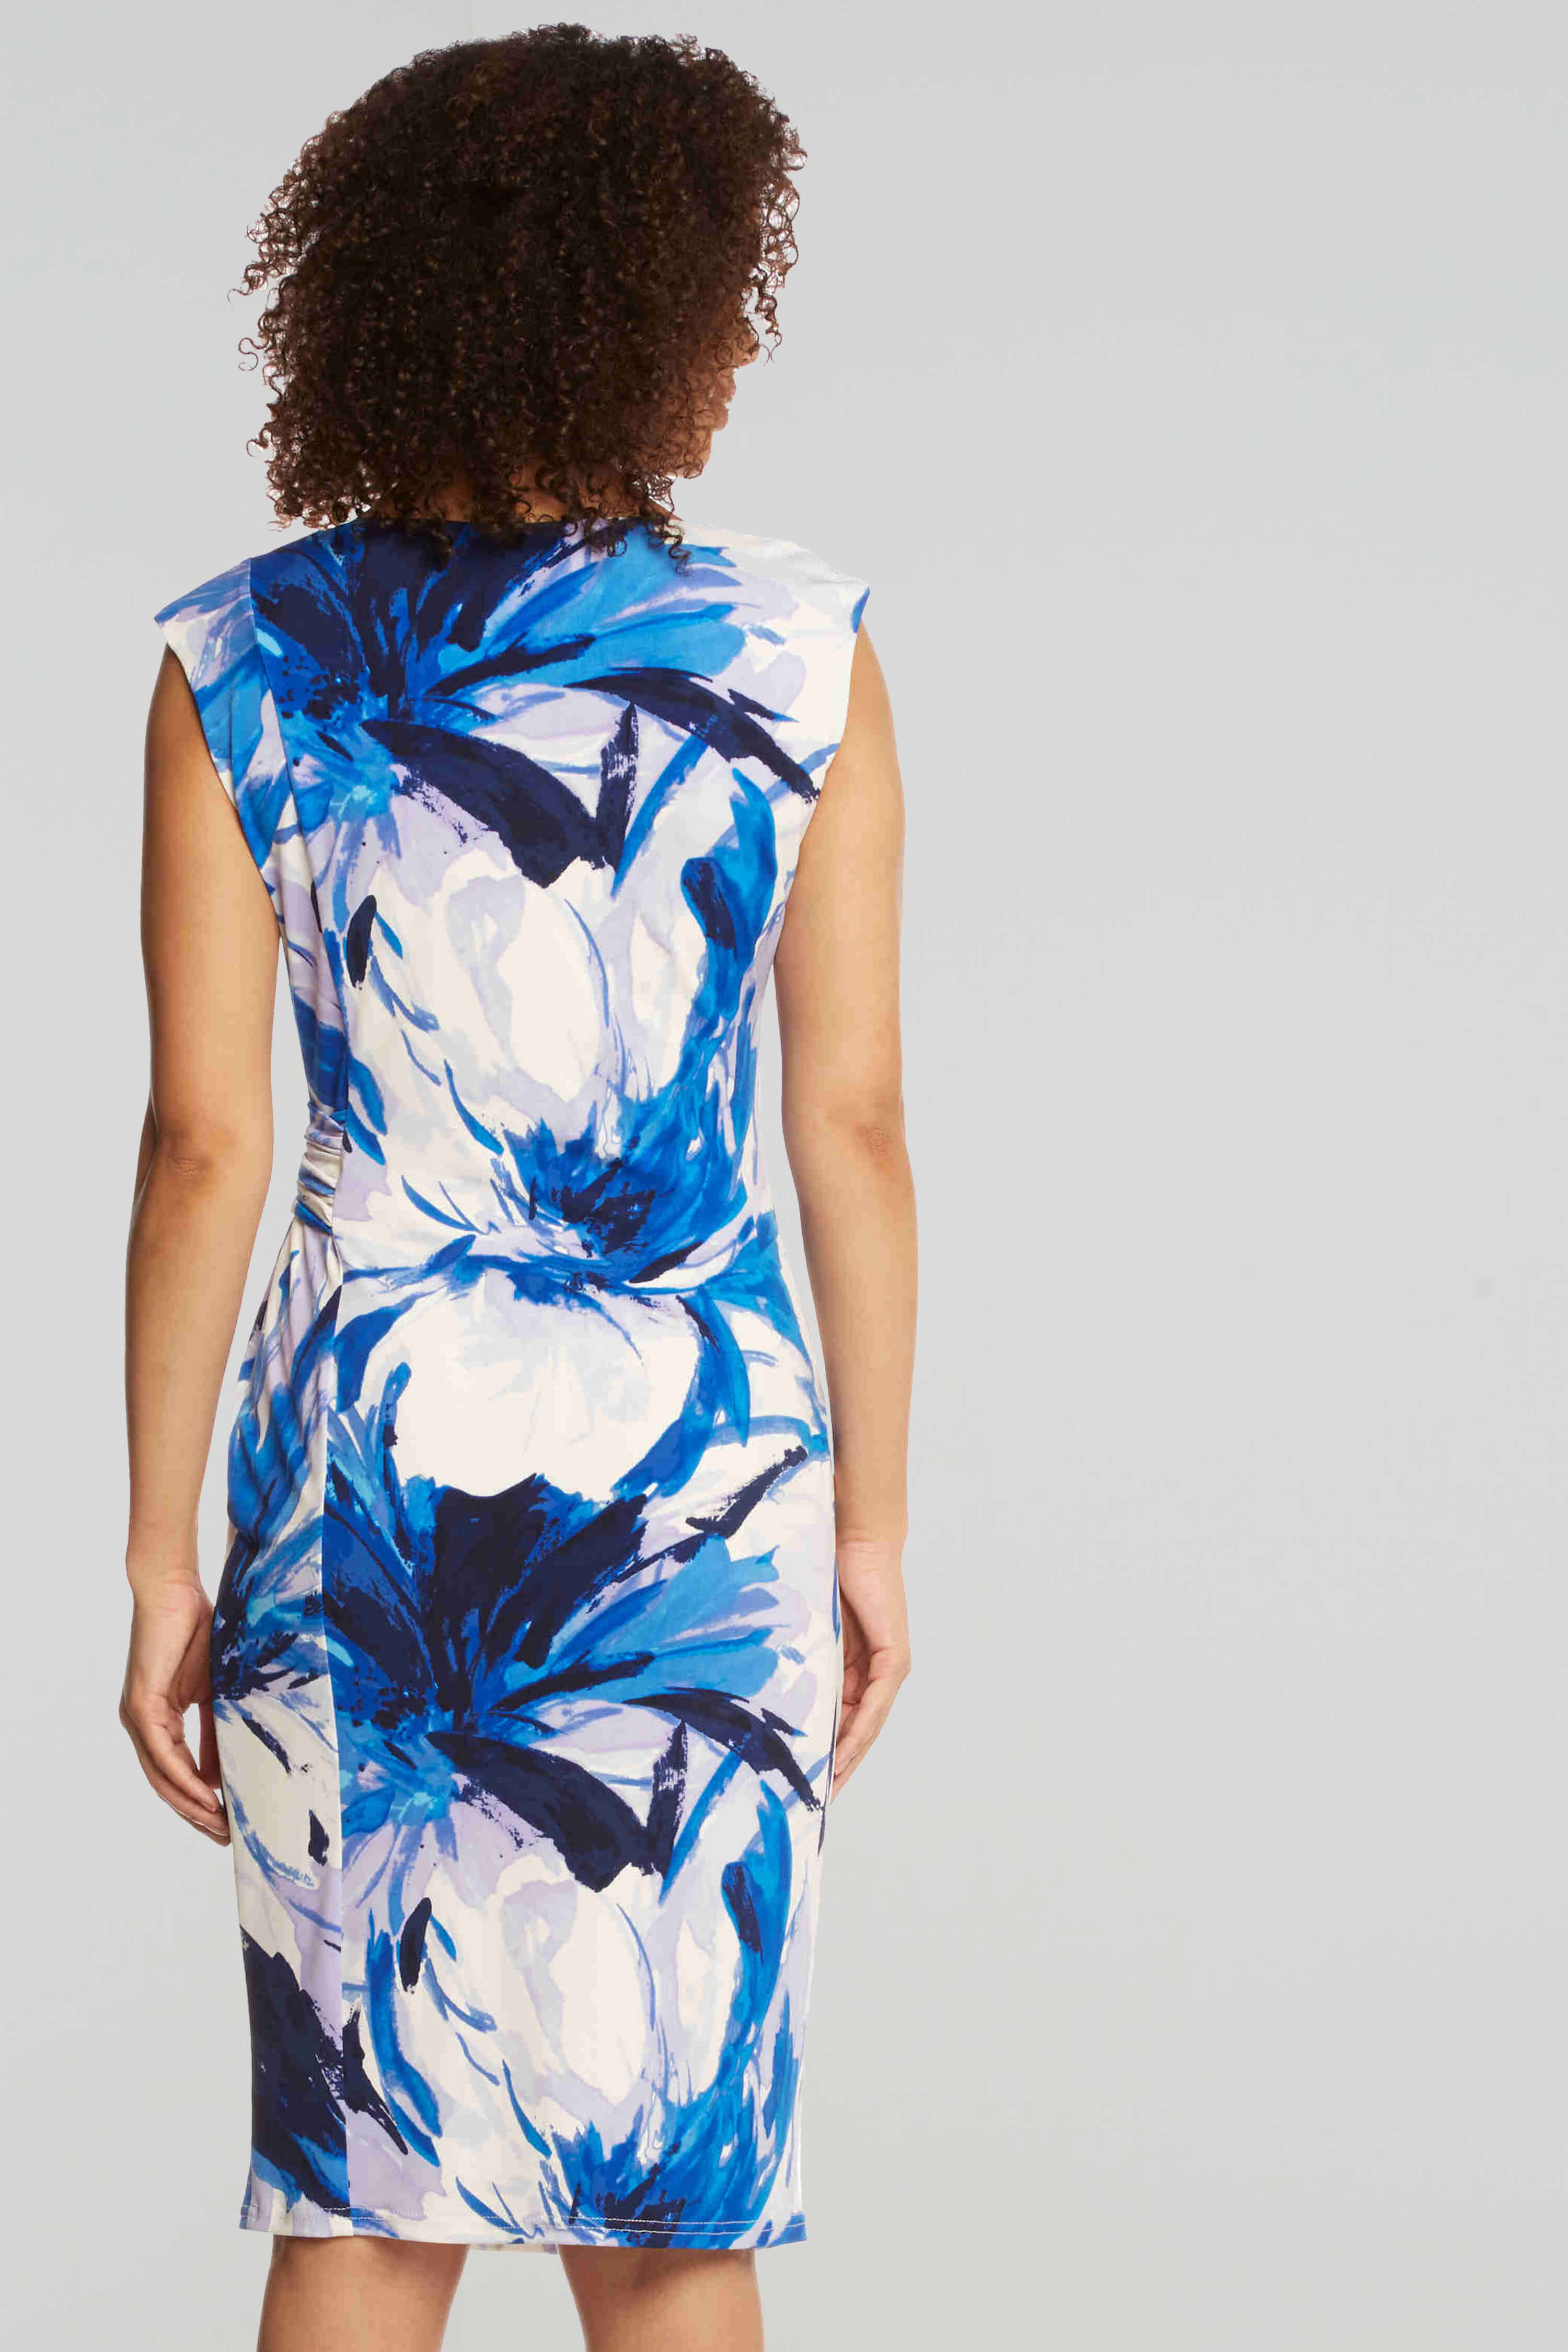 Royal Blue Abstract Underwater Floral Print Dress, Image 3 of 4